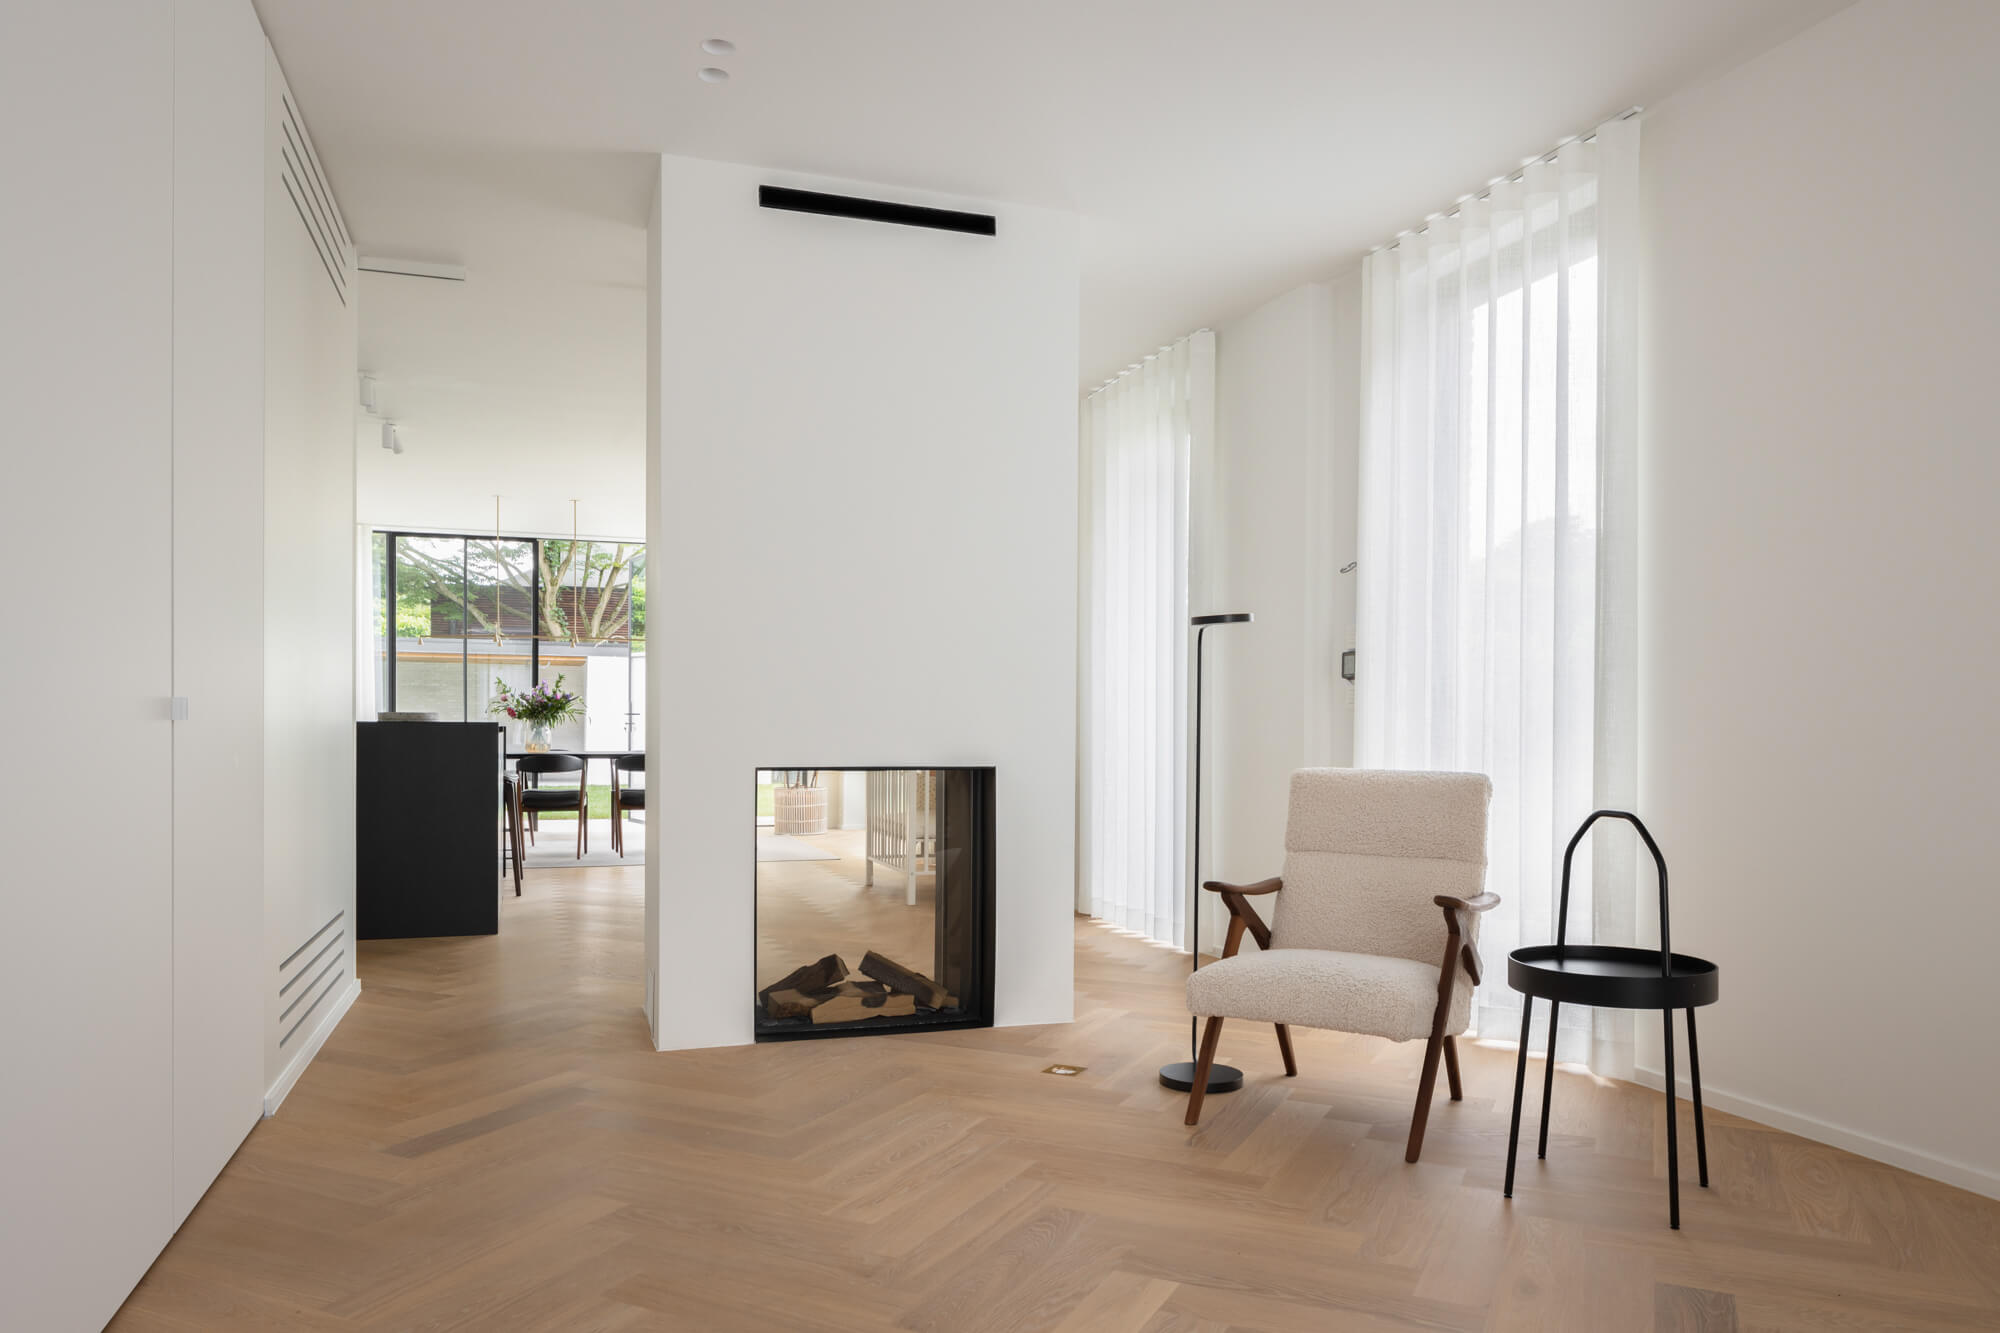 Light wood flooring in a modern living room complete with a double sided fireplace.